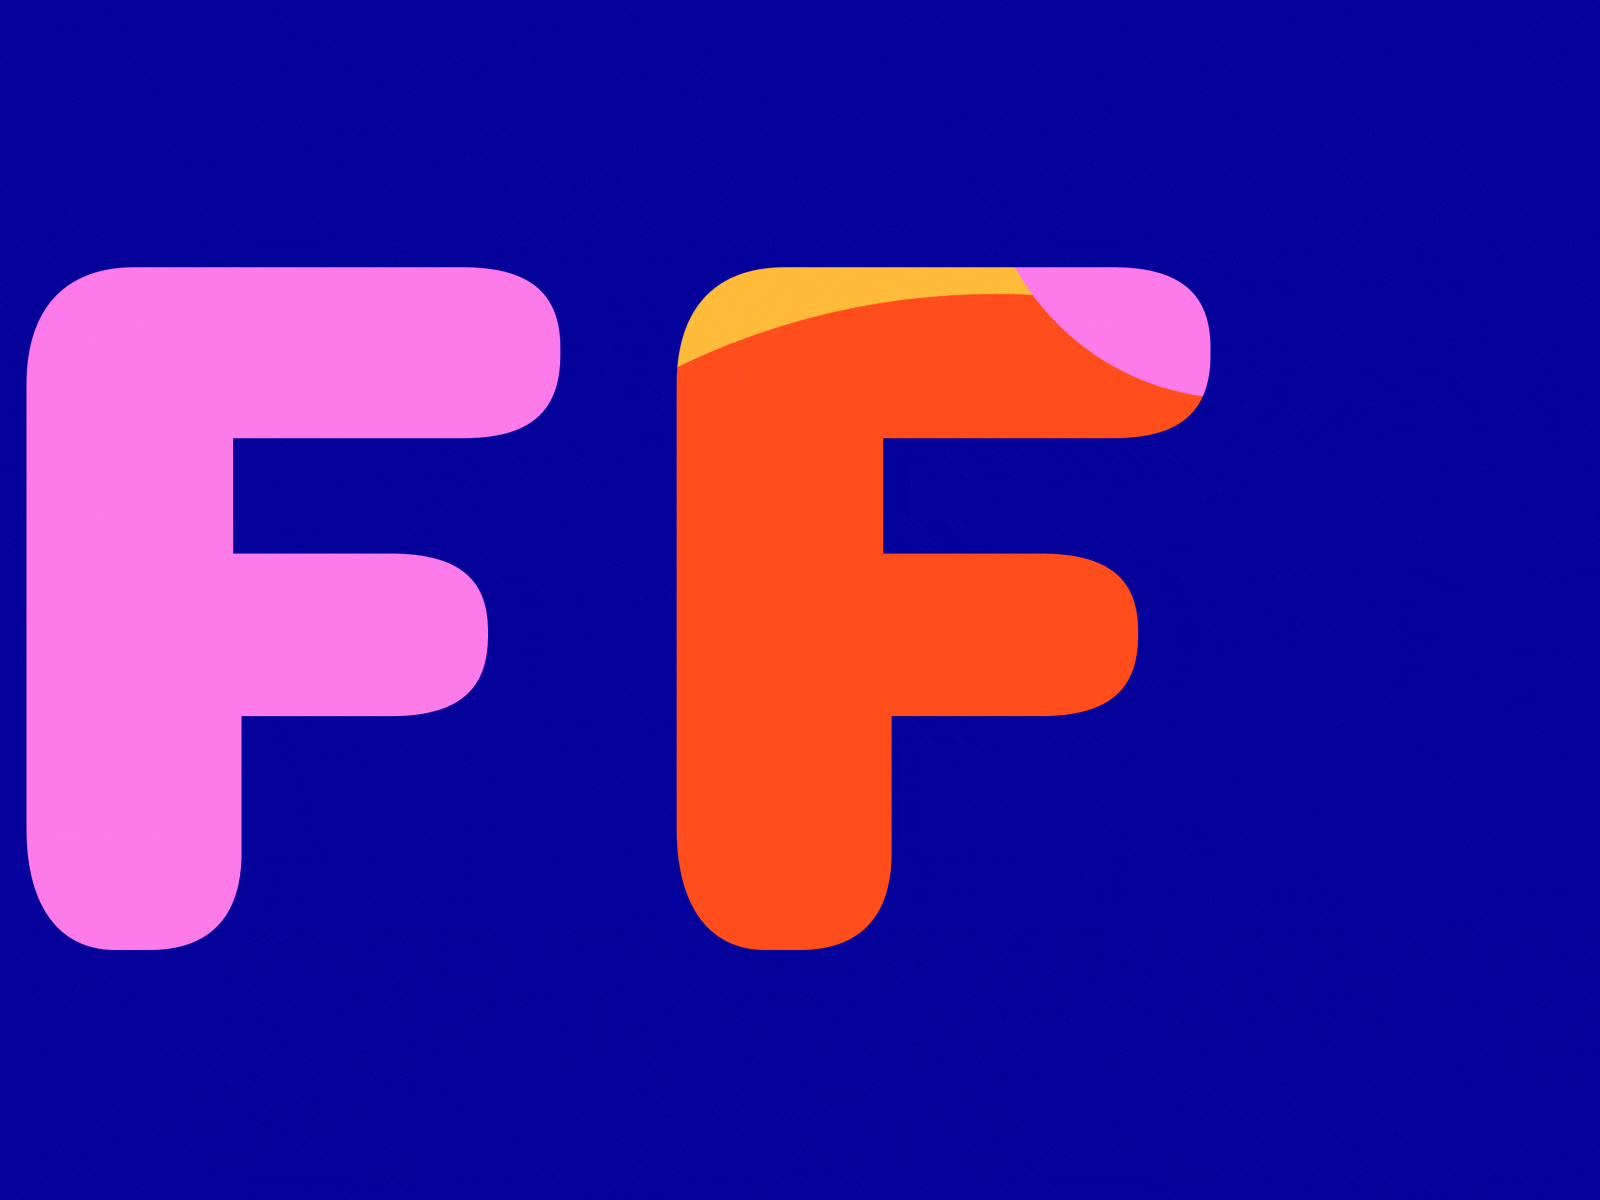 36 Days of Type - F by Nina Wasland on Dribbble